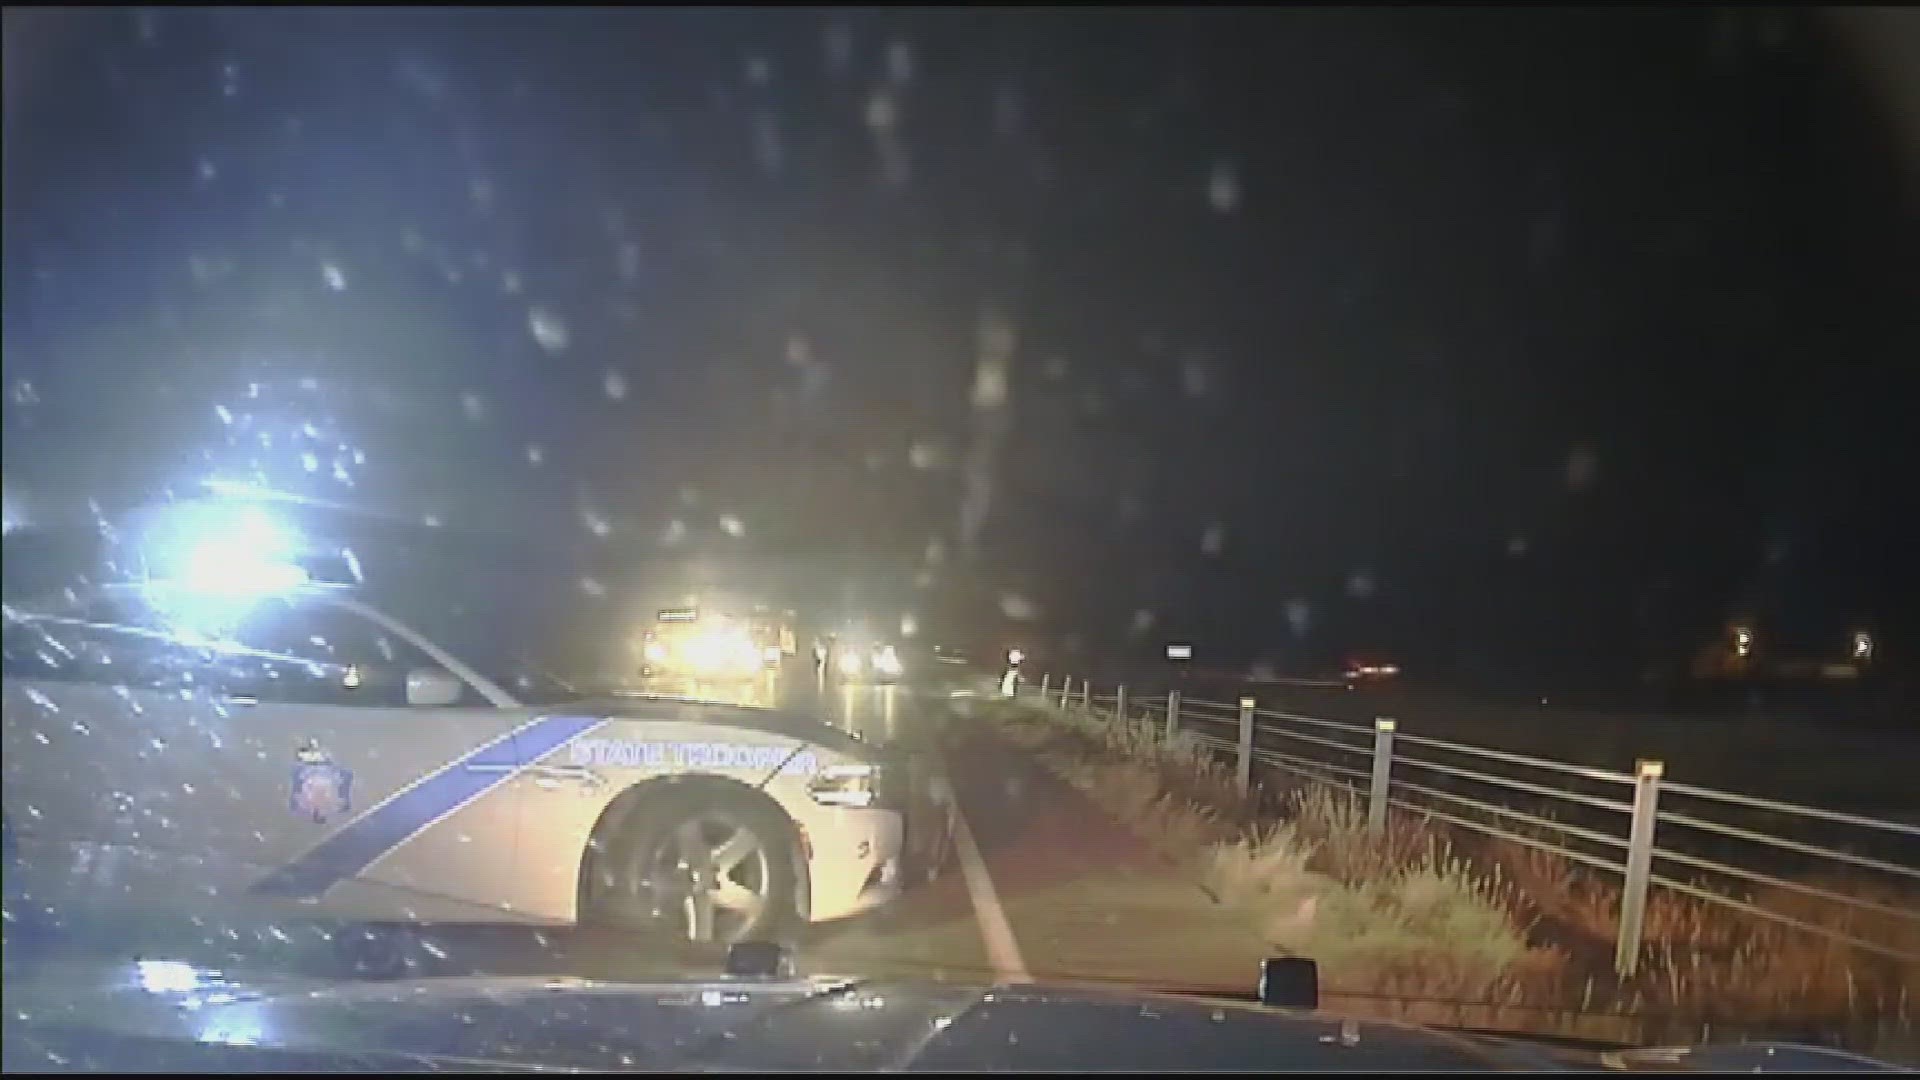 The Arkansas State Trooper is retiring after performing the PIT maneuver on the wrong car during a high-speed chase.